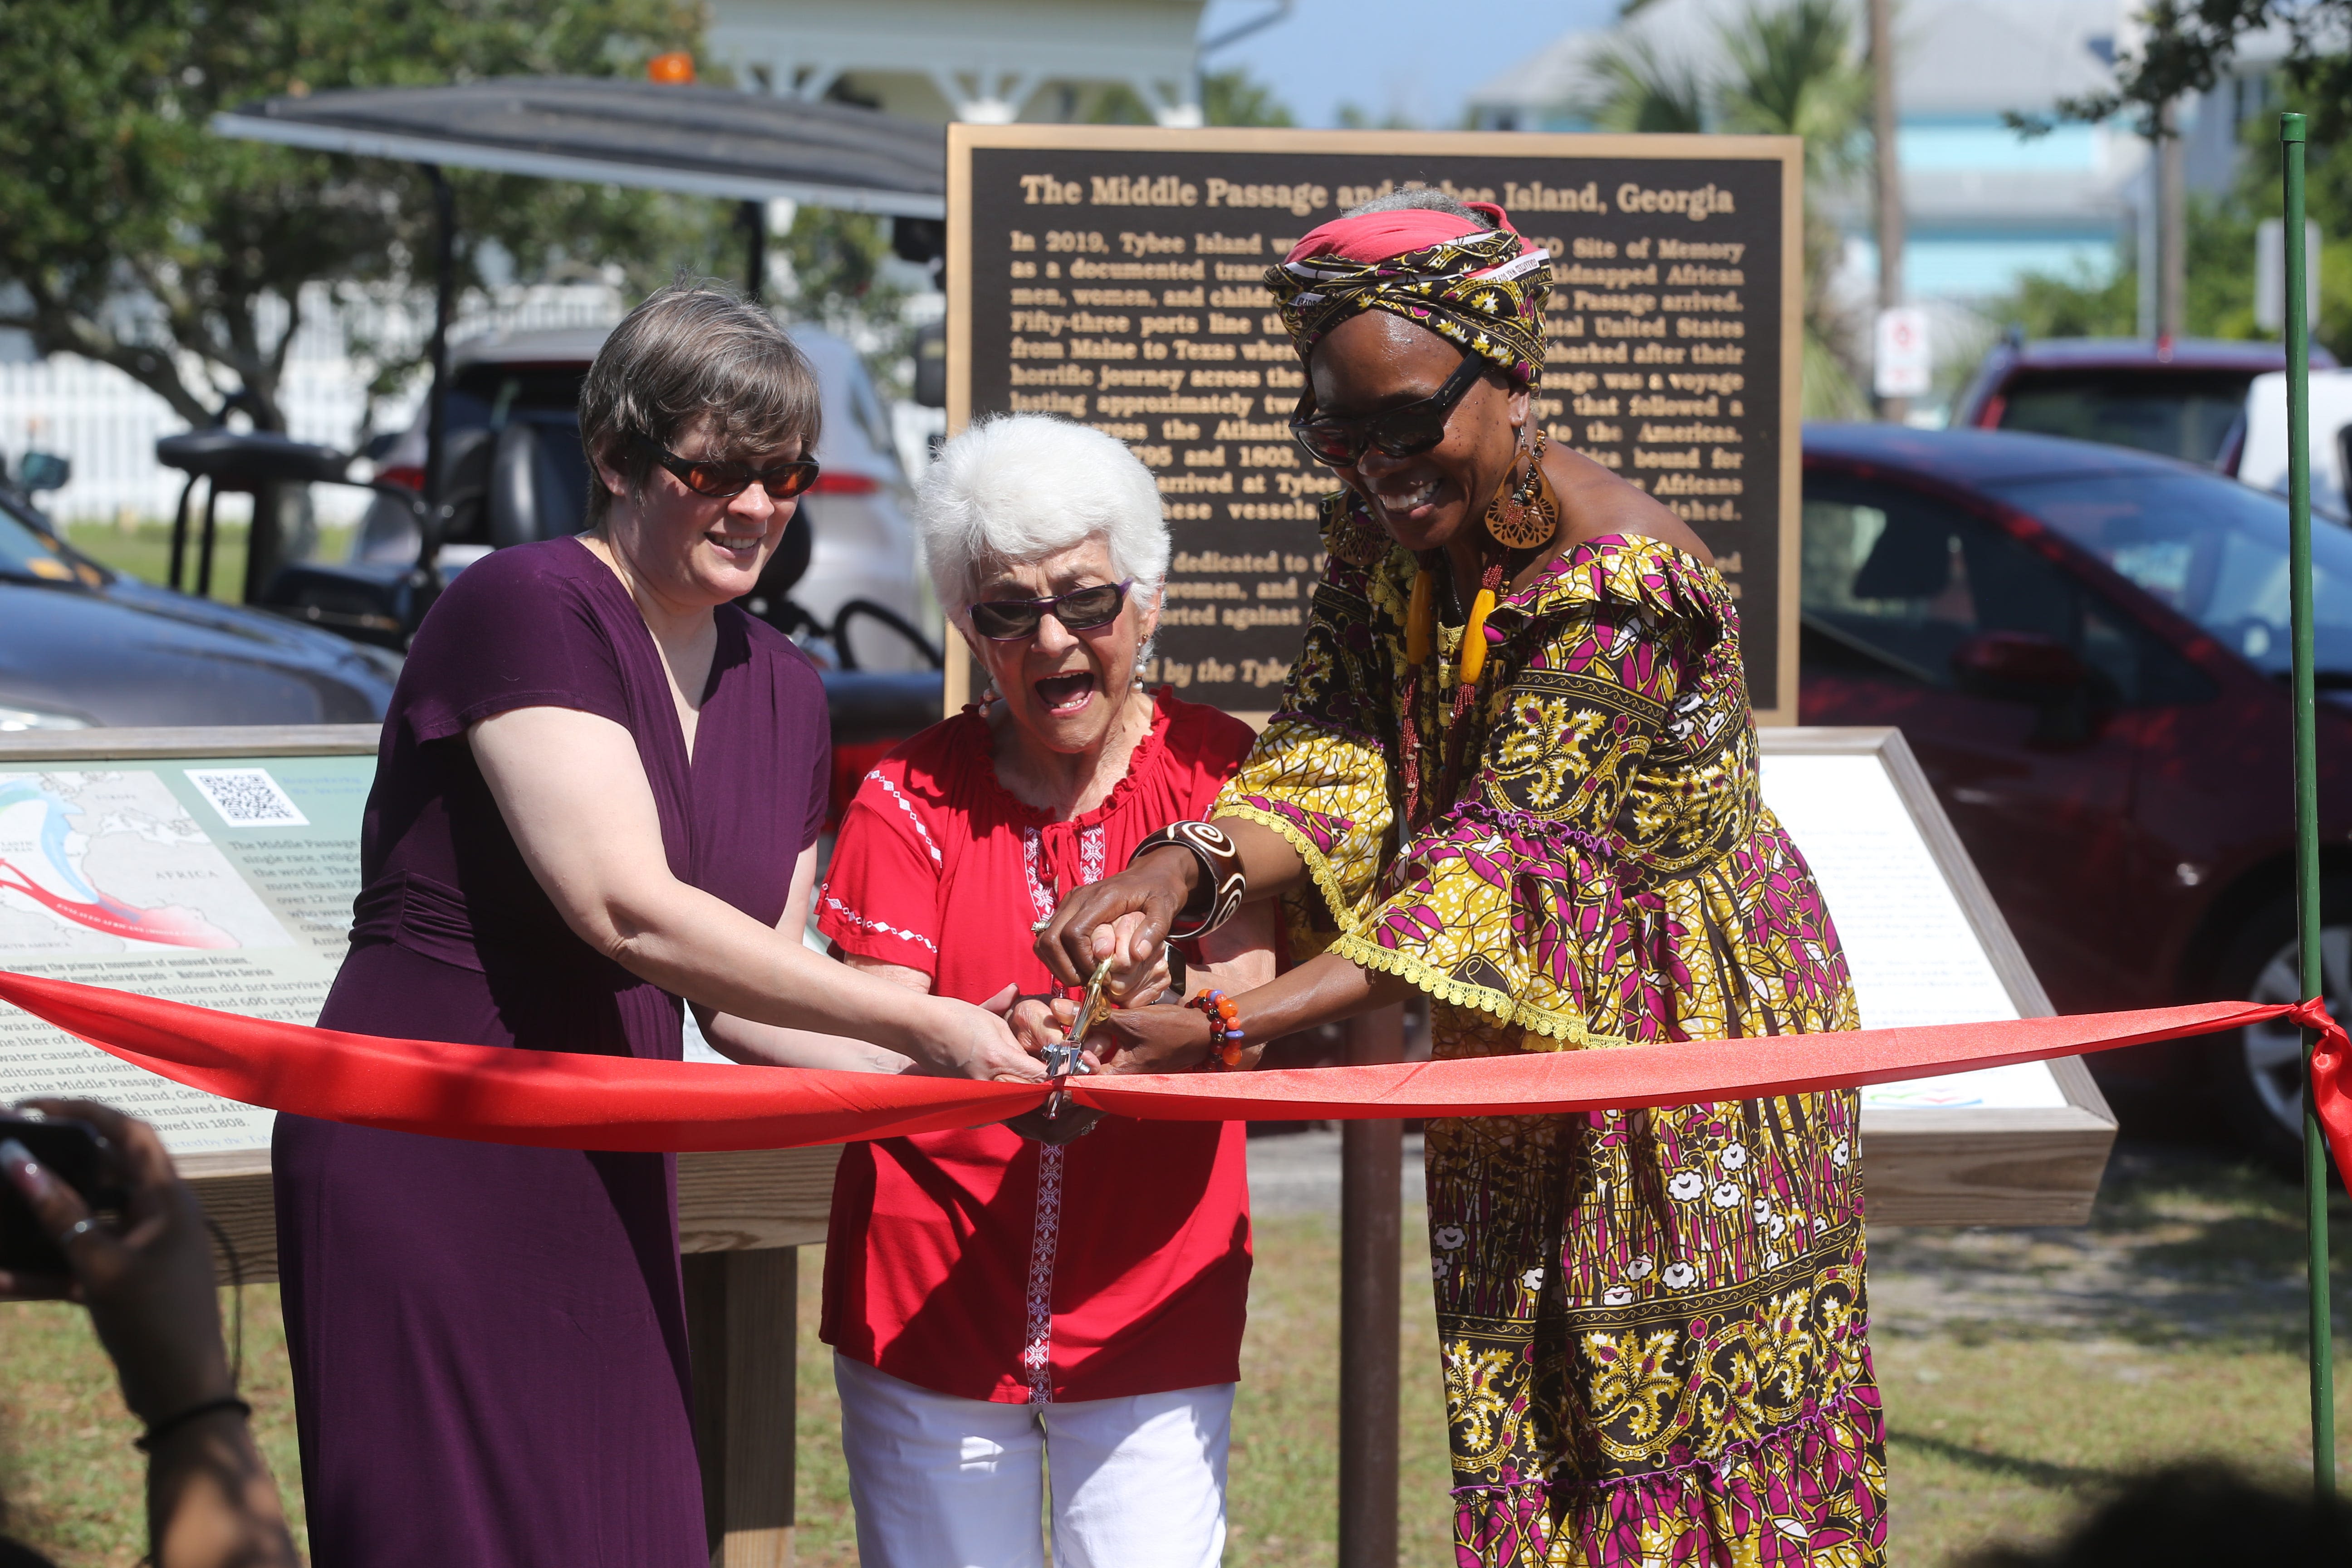 Tybee Black History Trail markers dedicated. 'We’re learning about the people who lived here'